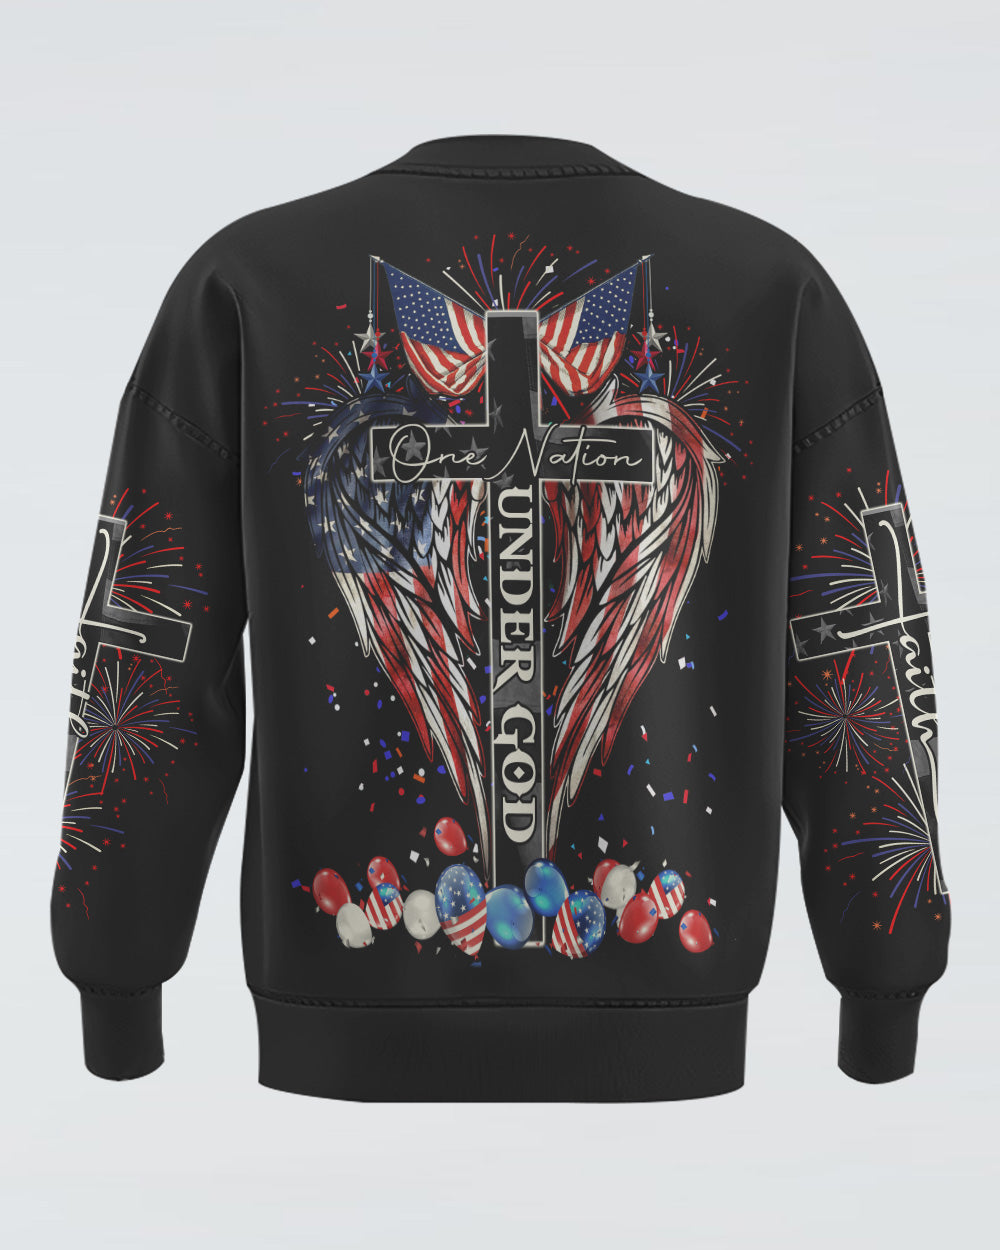 One Nation Under God Cross Wings Independence Day Women's Christian Sweatshirt